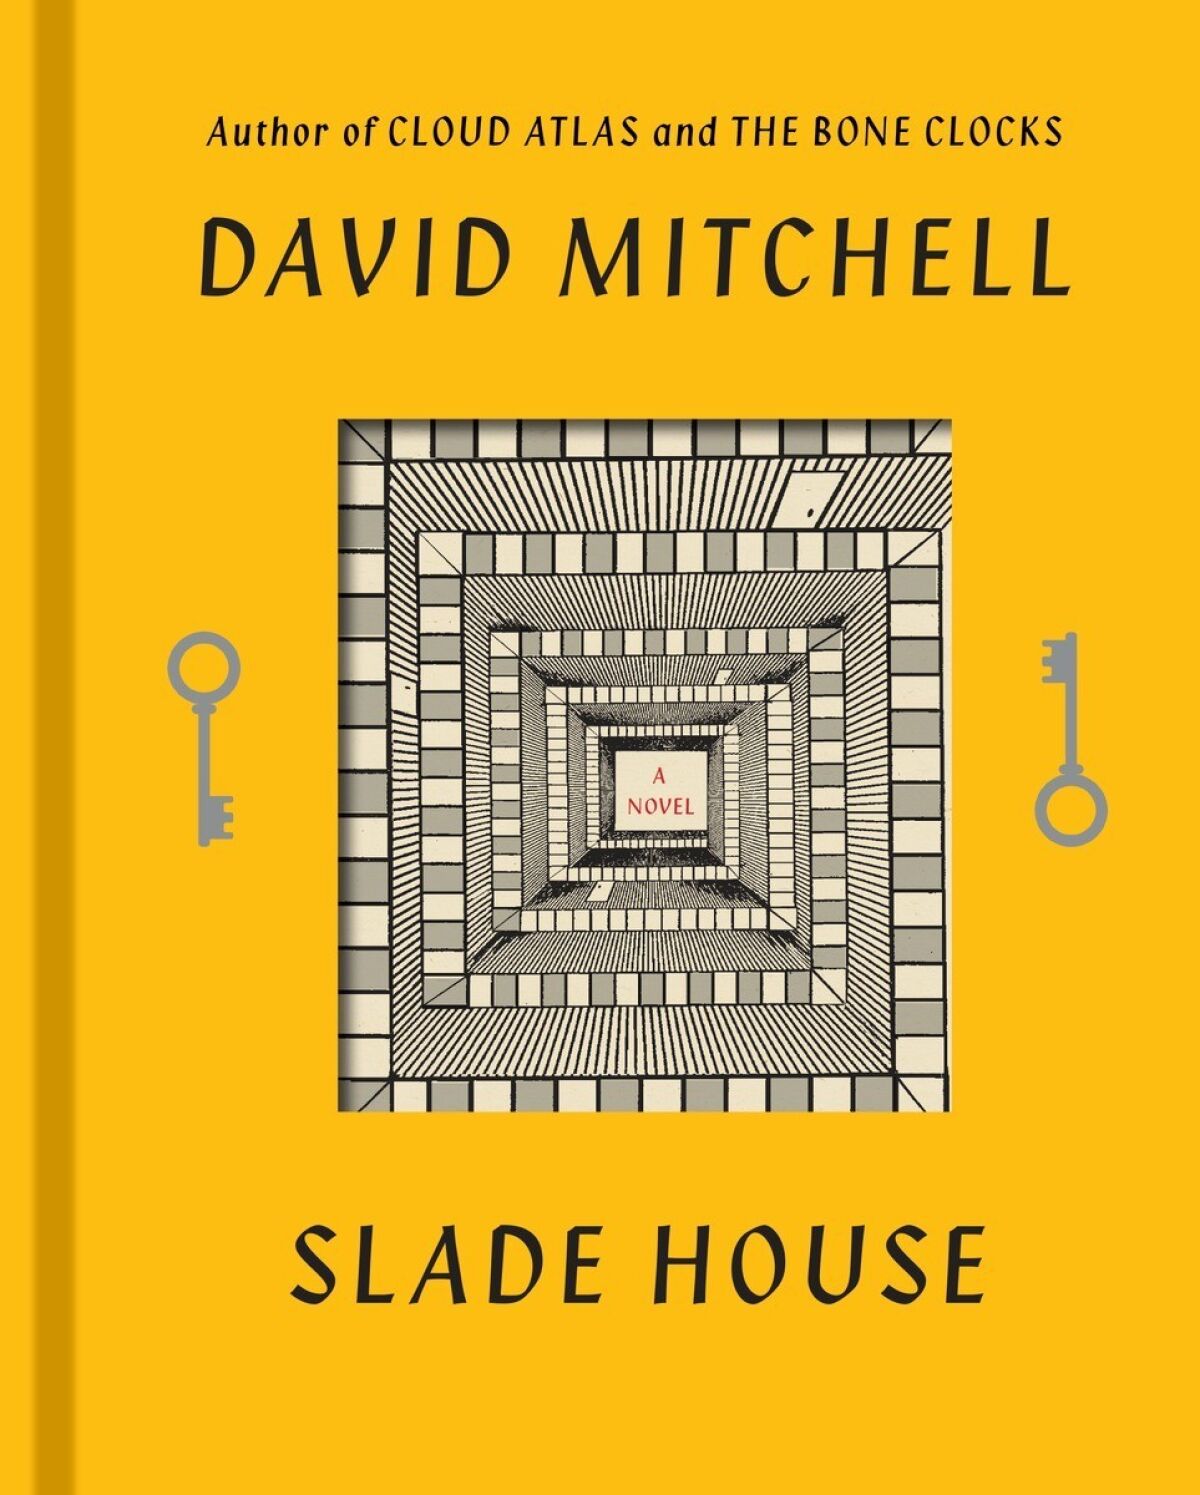 "Slade House" by David Mitchell